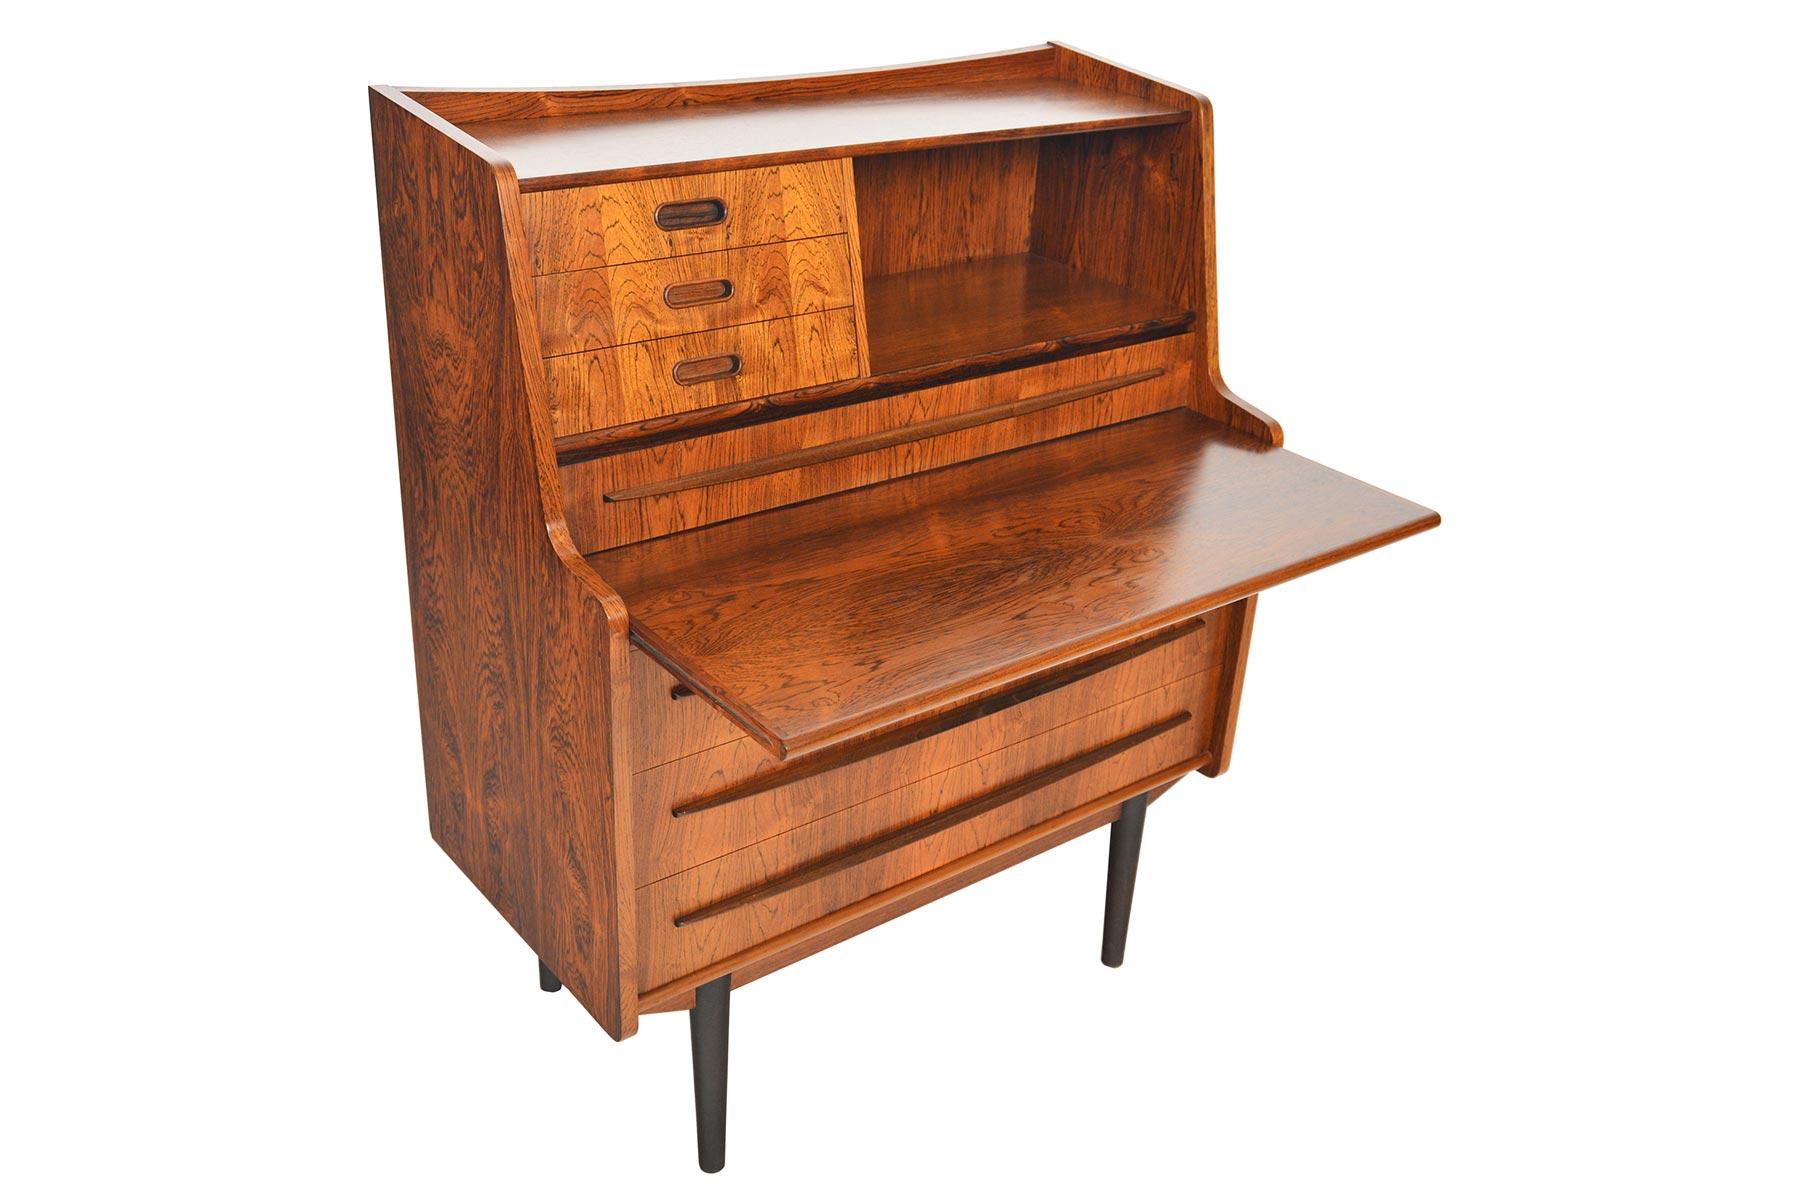 This incredible Danish modern rosewood vanity secretary desk hails straight from the 1960s! Manufactured by Gunnar Falsigs, this fantastic piece features a pull out vanity with original robin’s egg blue interior. Beneath the vanity is a pull out